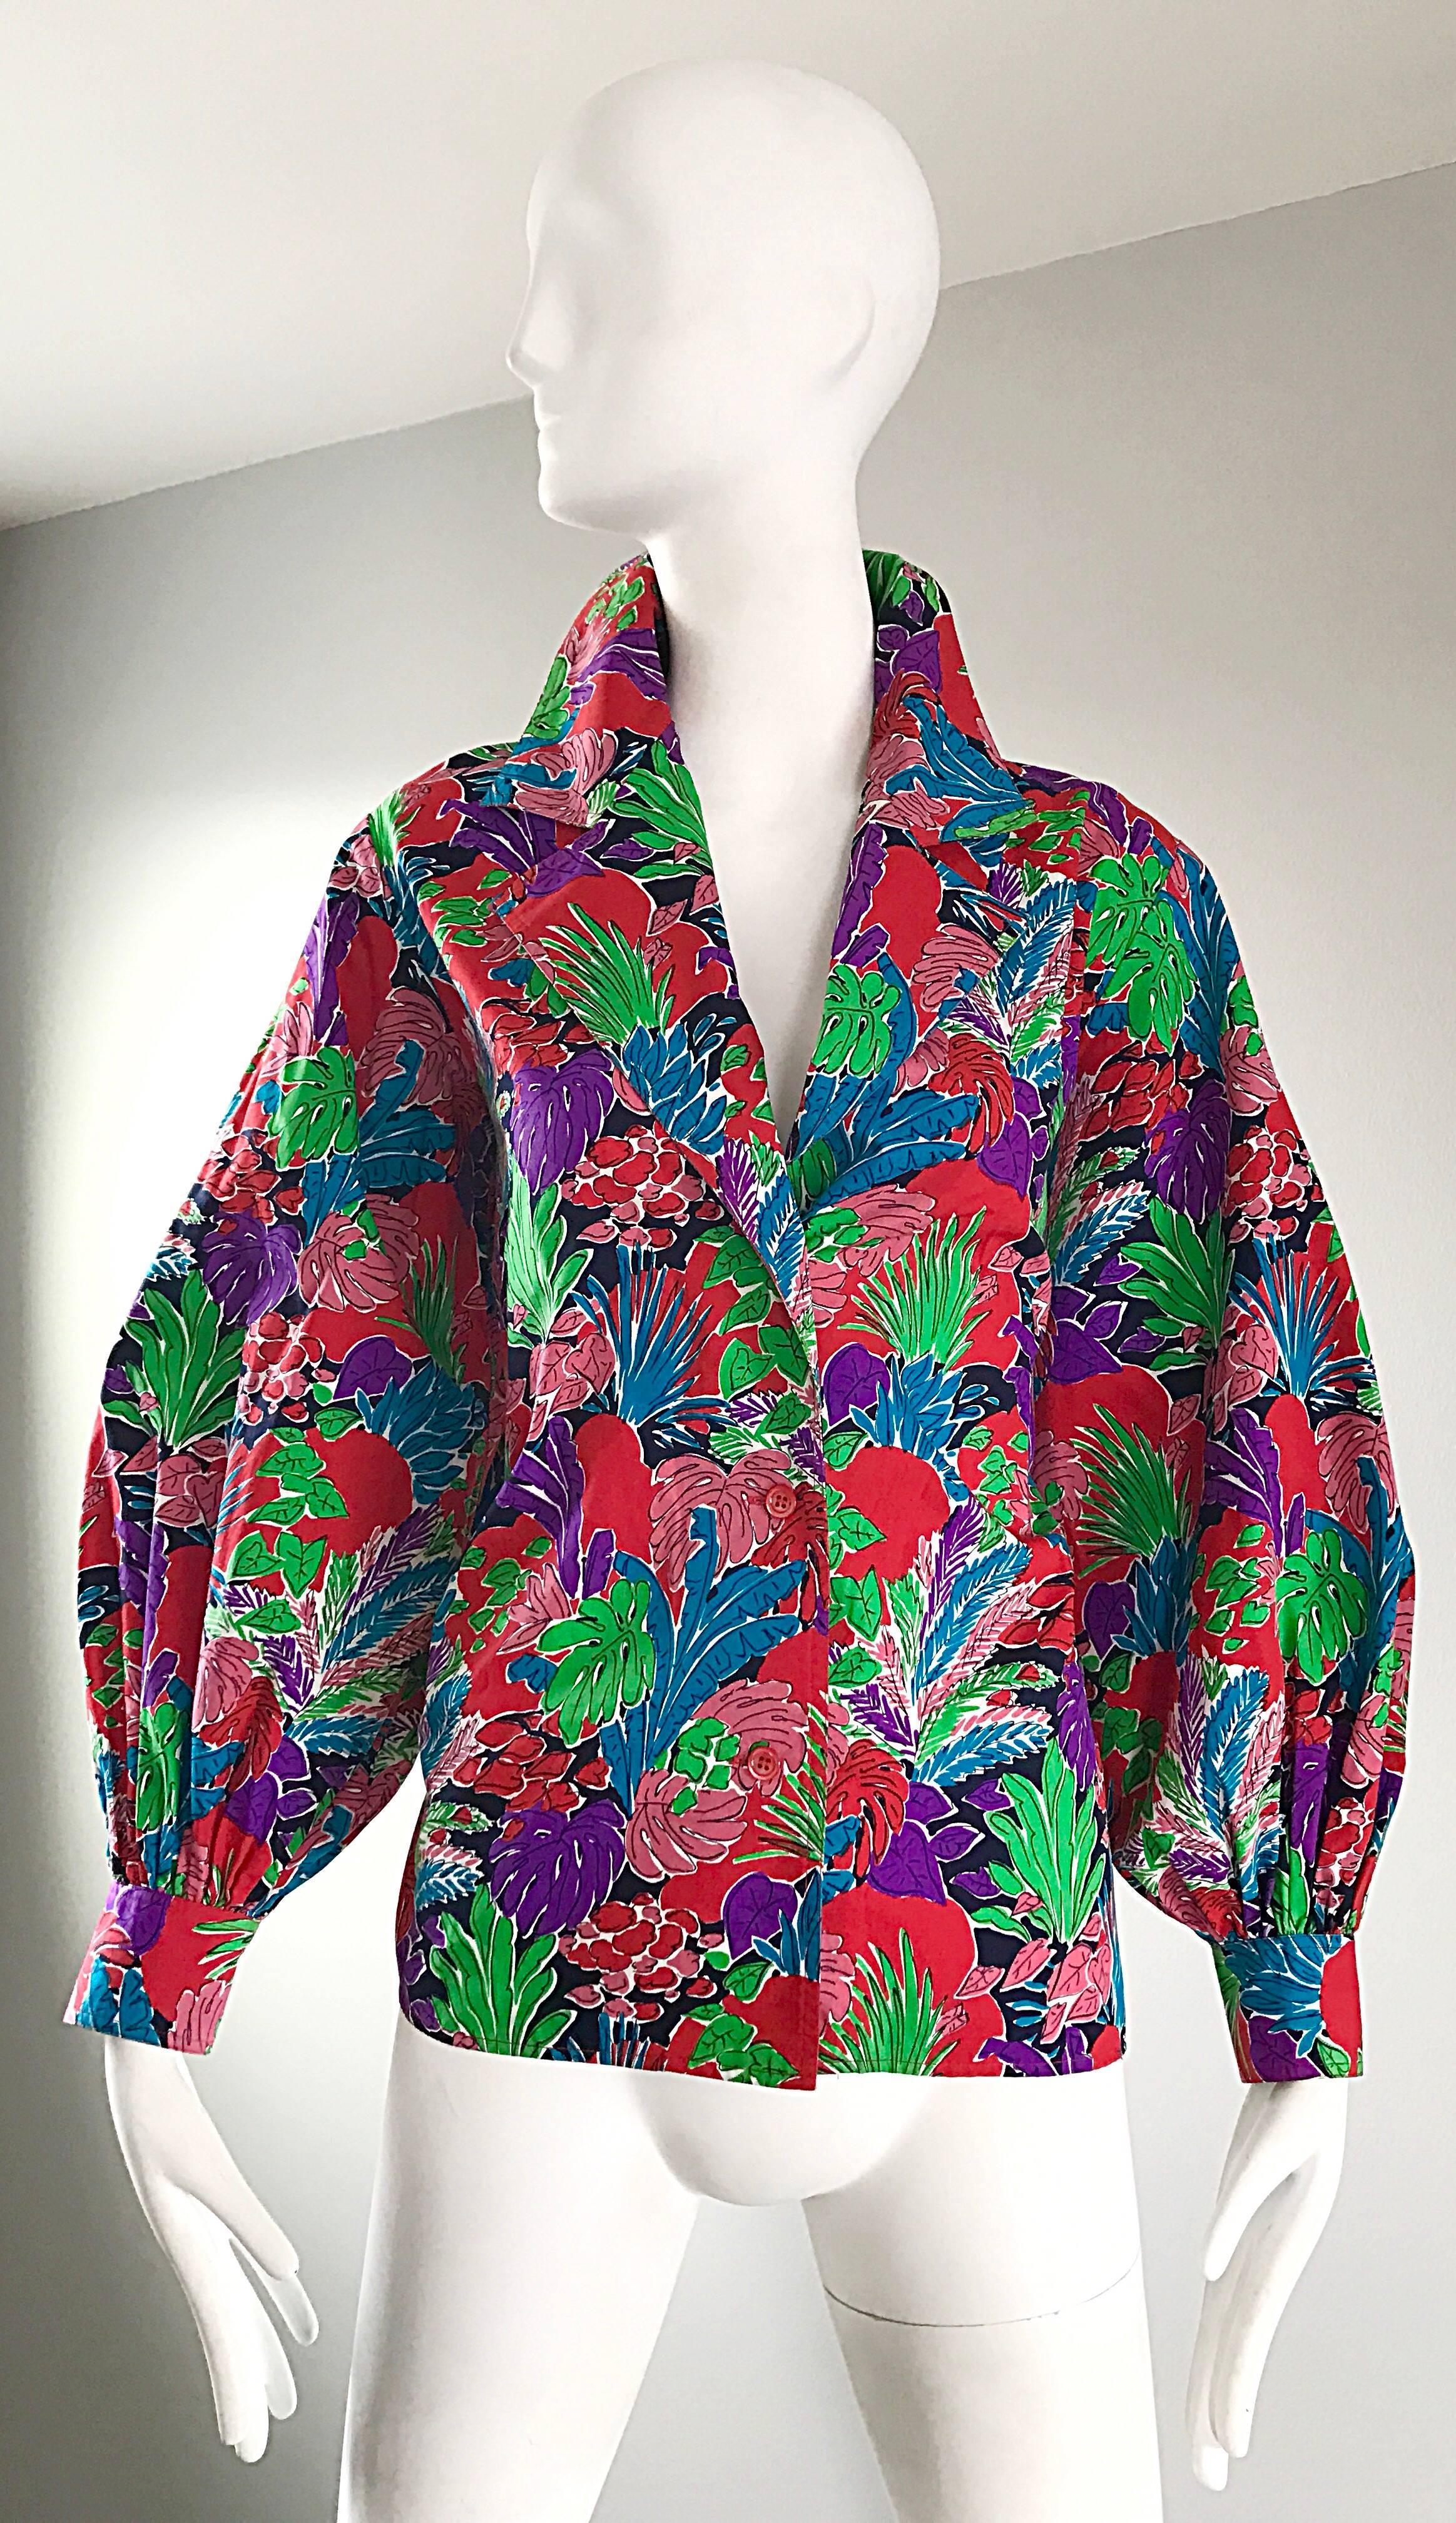 Rare YVES SAINT LAURENT YSL Rive Gauche cotton blouse or jacket! Has a tropical vibe, with bright colors of red, purple, pink, blue and white throughout. Signature YSL lapels can be worn flipped up or left down. Wonderful balloon bishop sleeves with